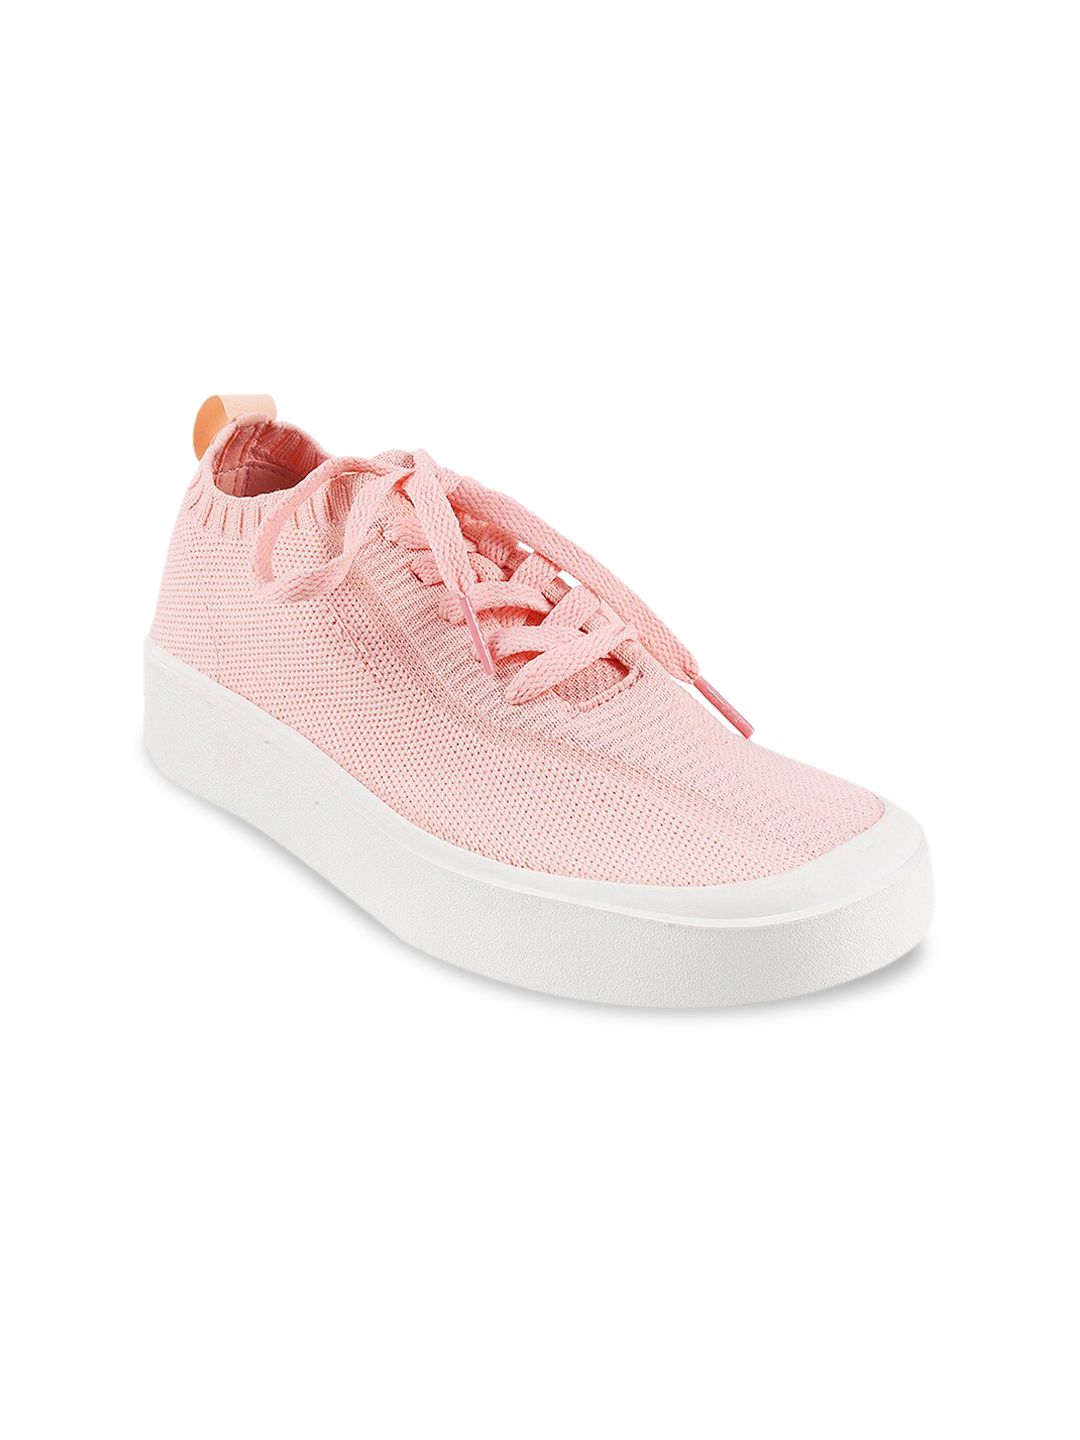 ACTIV Women Pink Woven Design Sneakers Price in India